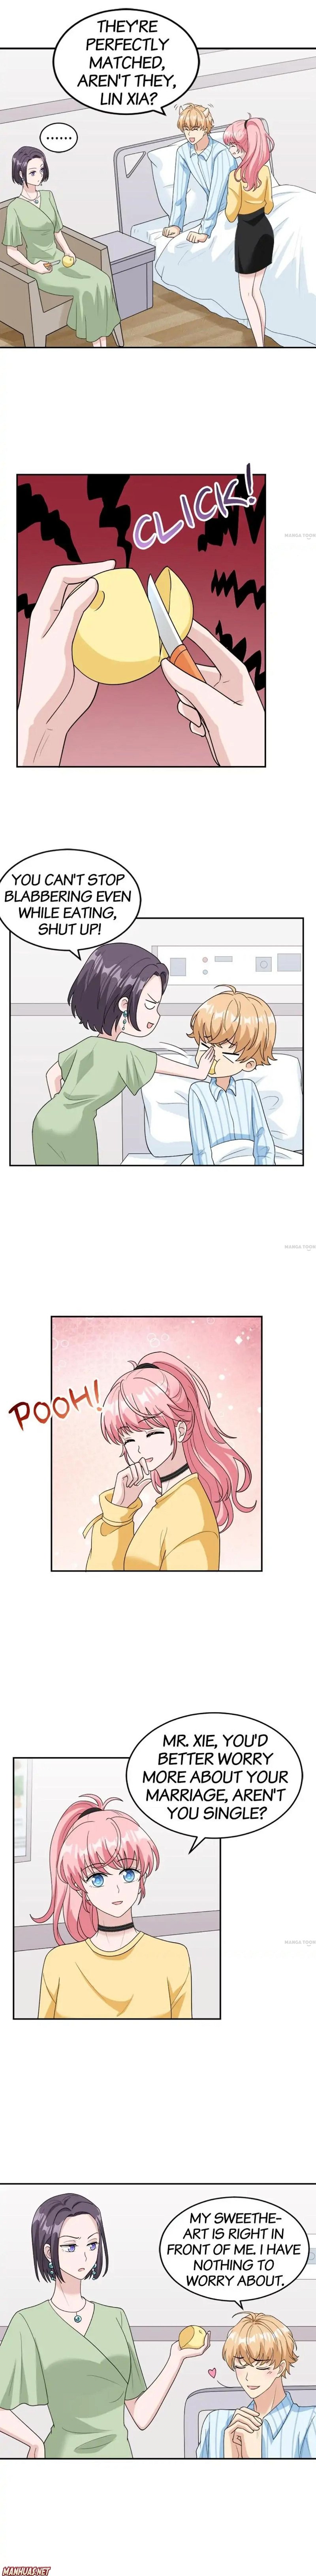 Falling For My Neighbor - Page 3